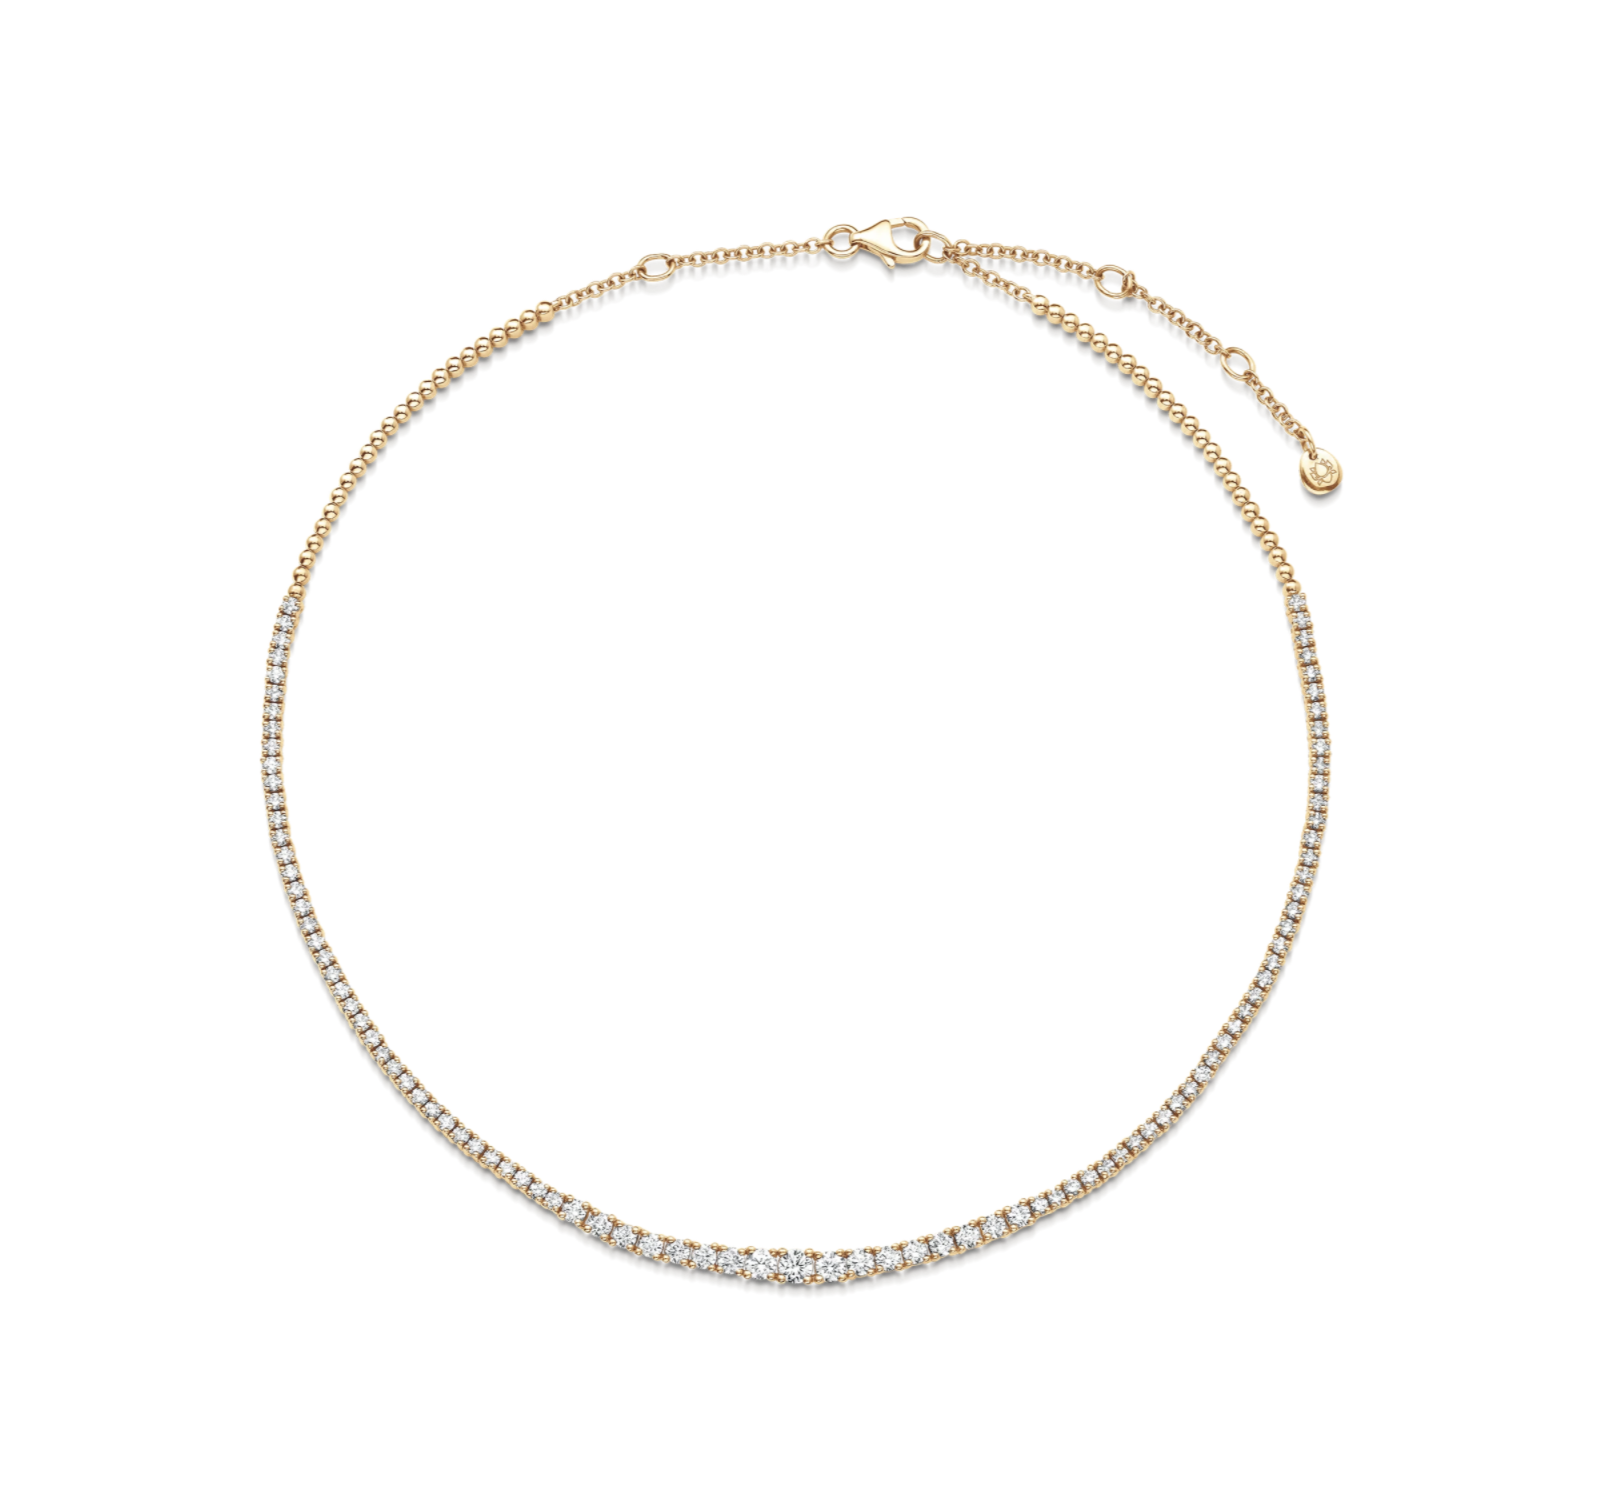 Isadora necklace with diamonds in a gold setting